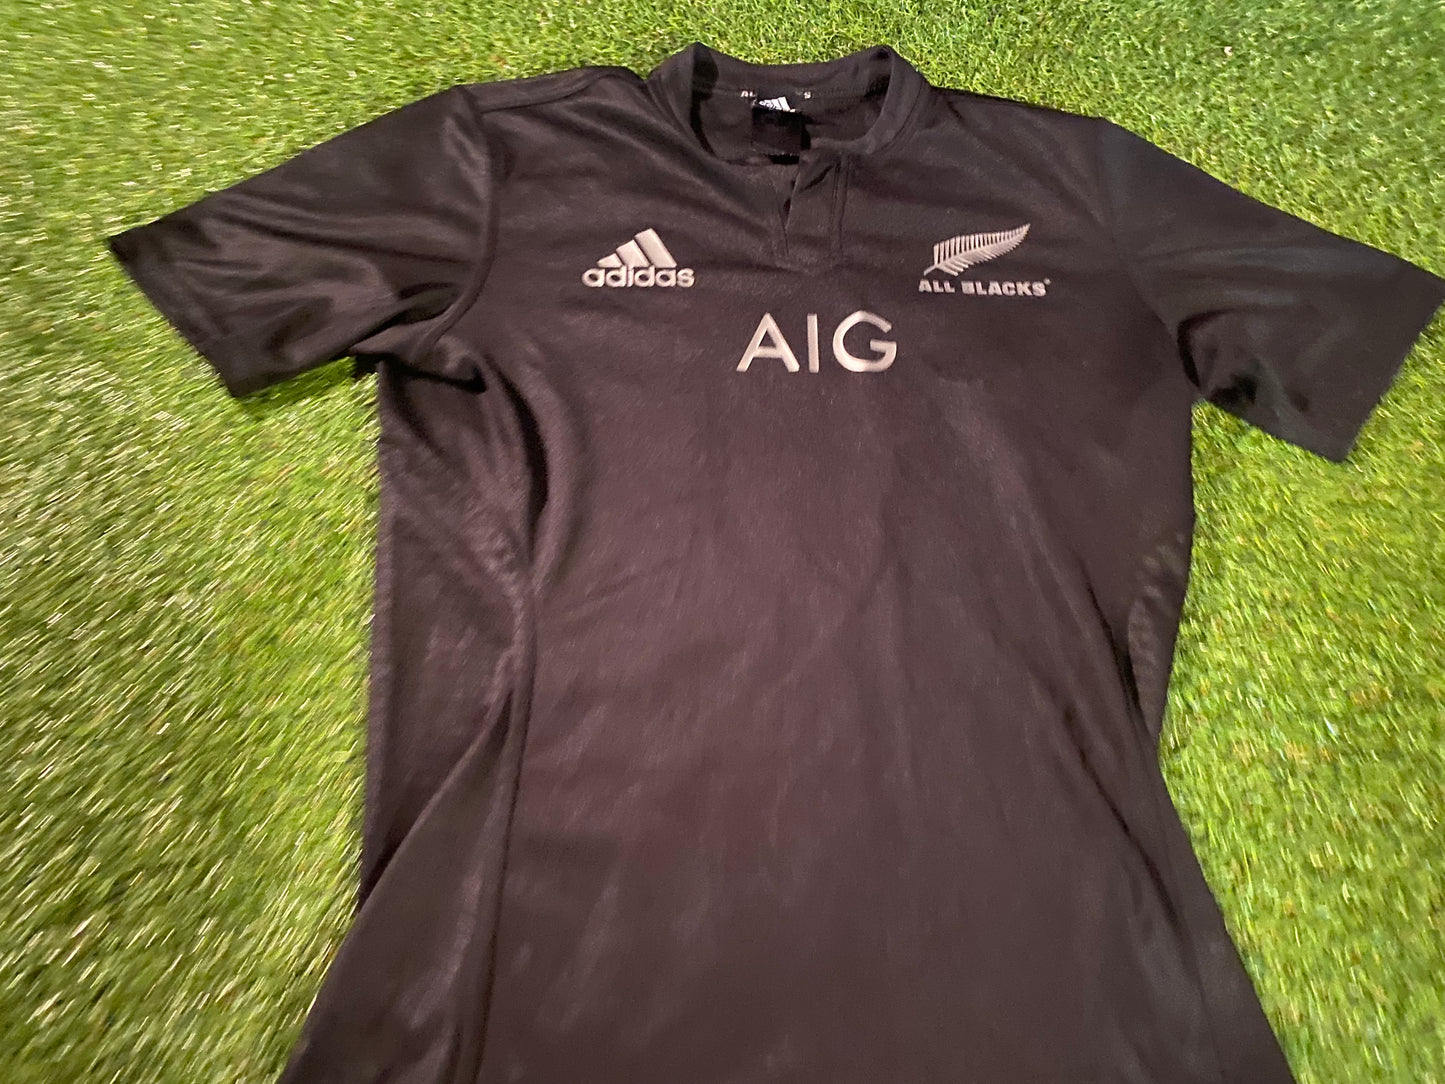 New Zealand All Blacks Rugby Union Football Large Mans Vintage Adidas Home Jersey